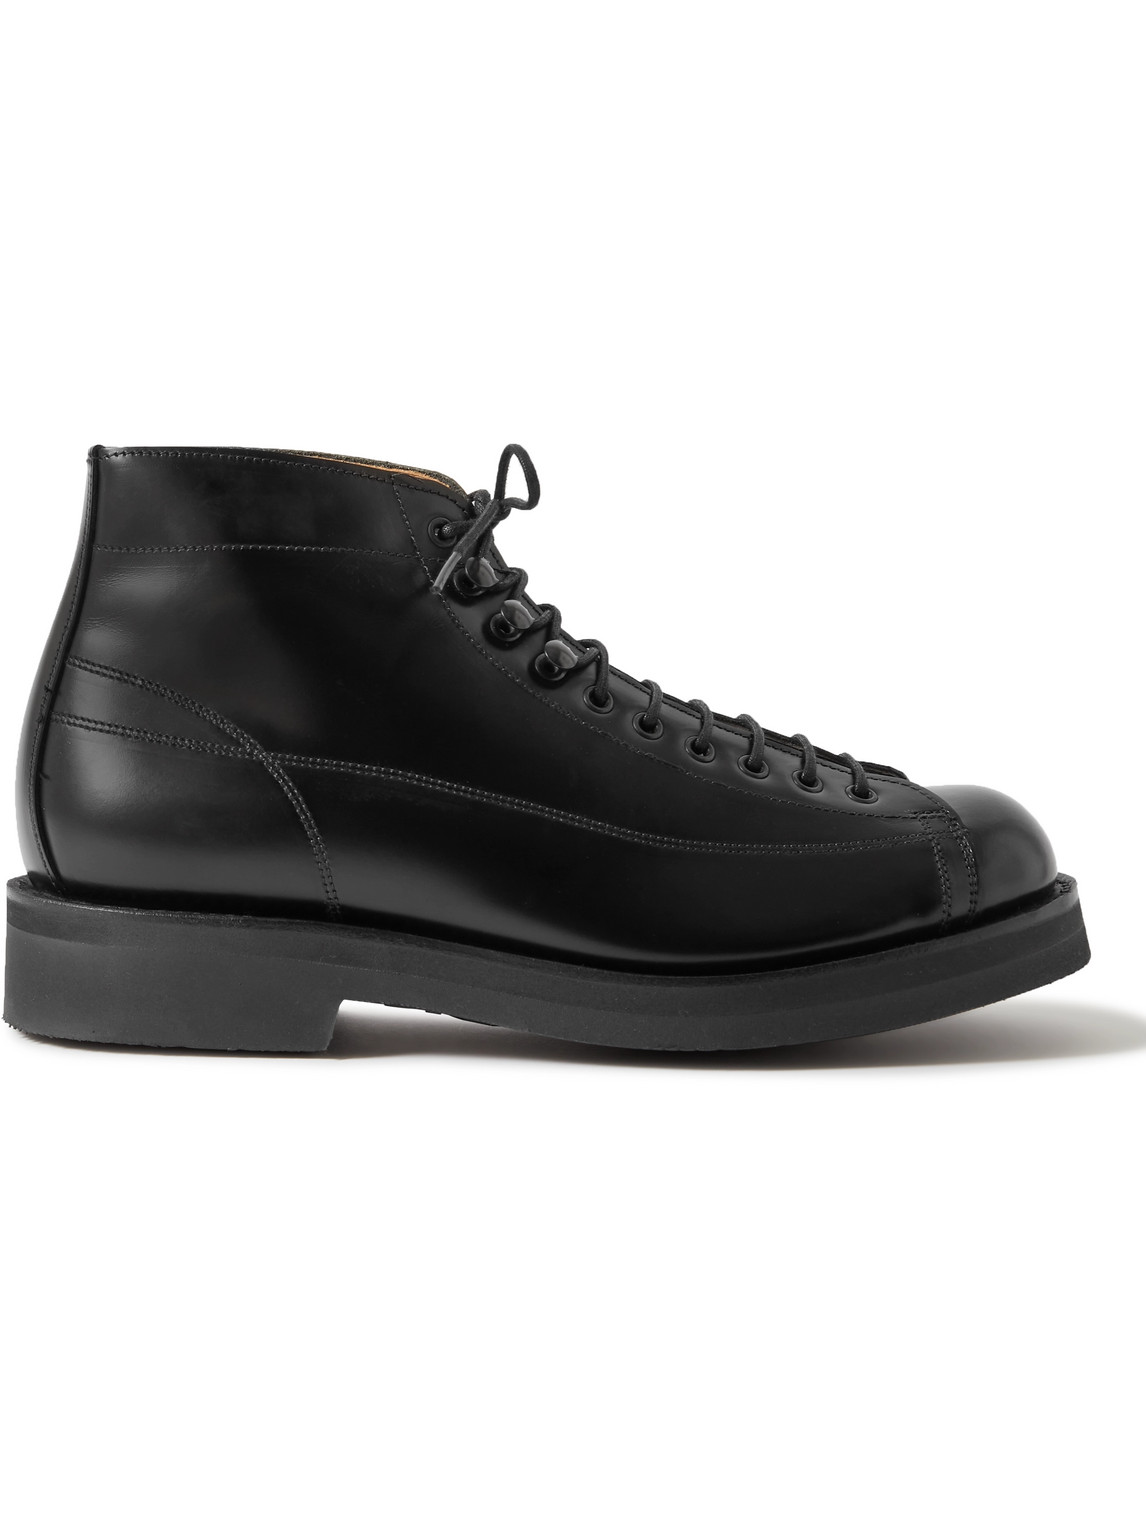 Grenson Dexter Leather Boots In Black